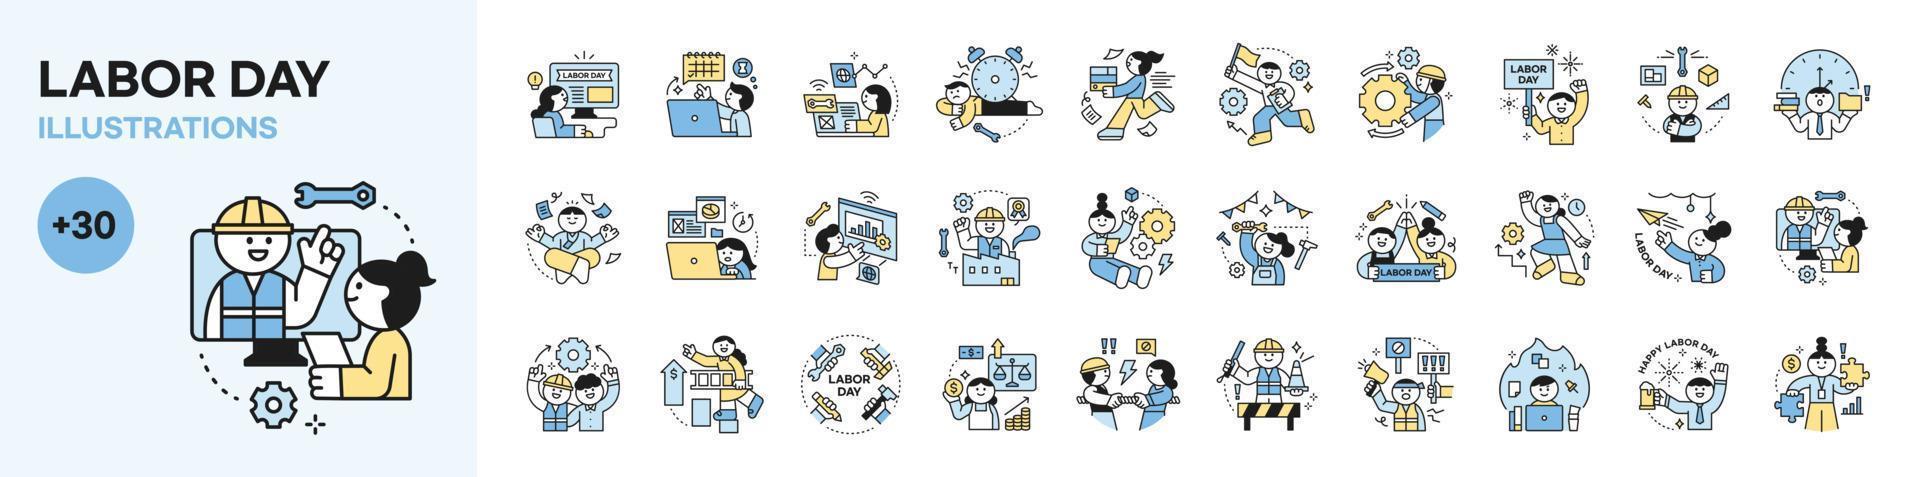 Labor Day. people who are working. Cute concept icon character about worker's life. mega set. vector